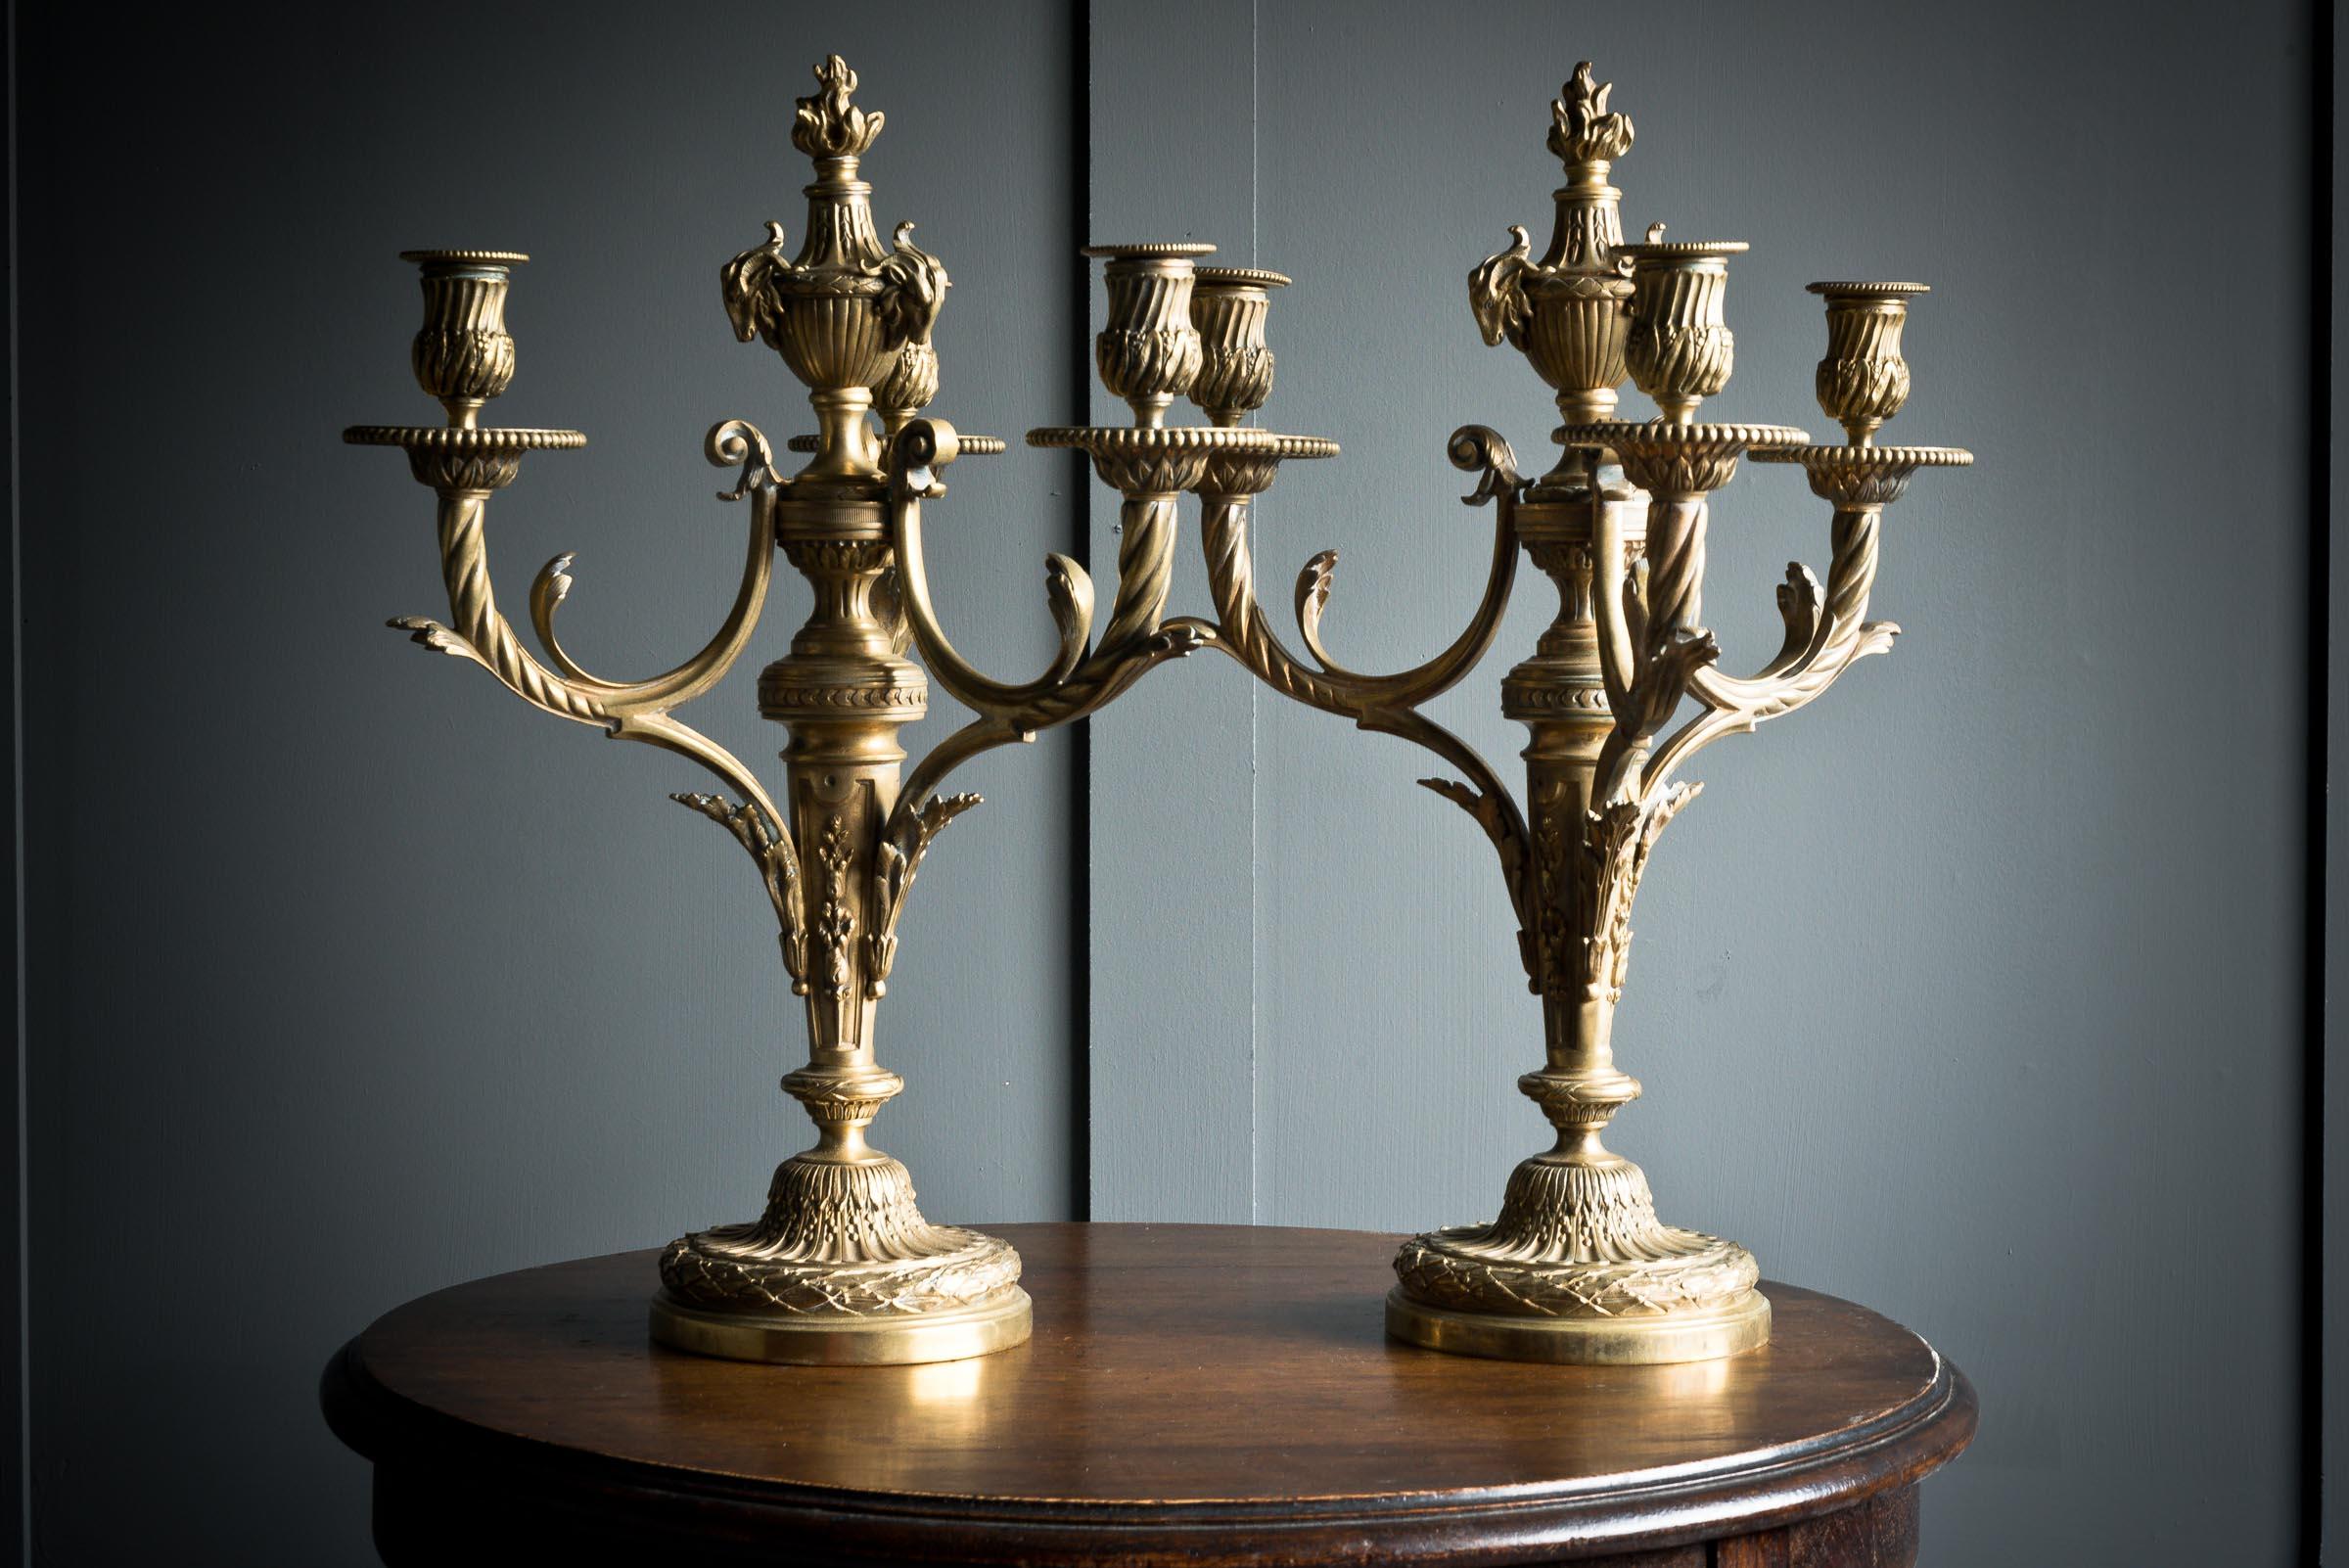 Stunning twin pair of french brass candelabra each consisting of three scrolled arms delicatley sitting on a shallow dome base. All arms entacted with candle holder cups complete ready for use. 
